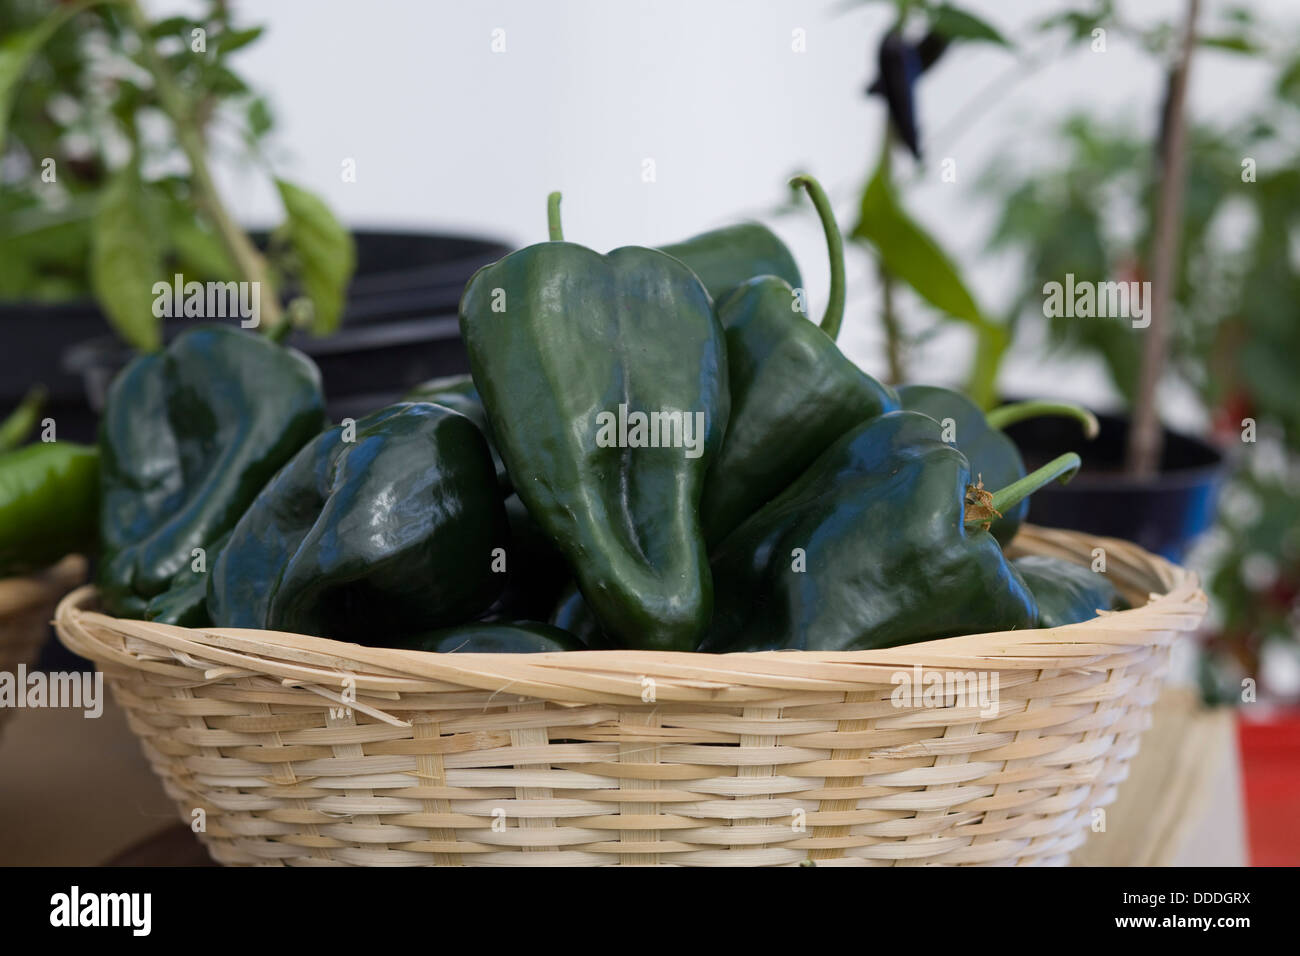 Capsicum annuum Green Peppers in a Wicker Basket Stock Photo